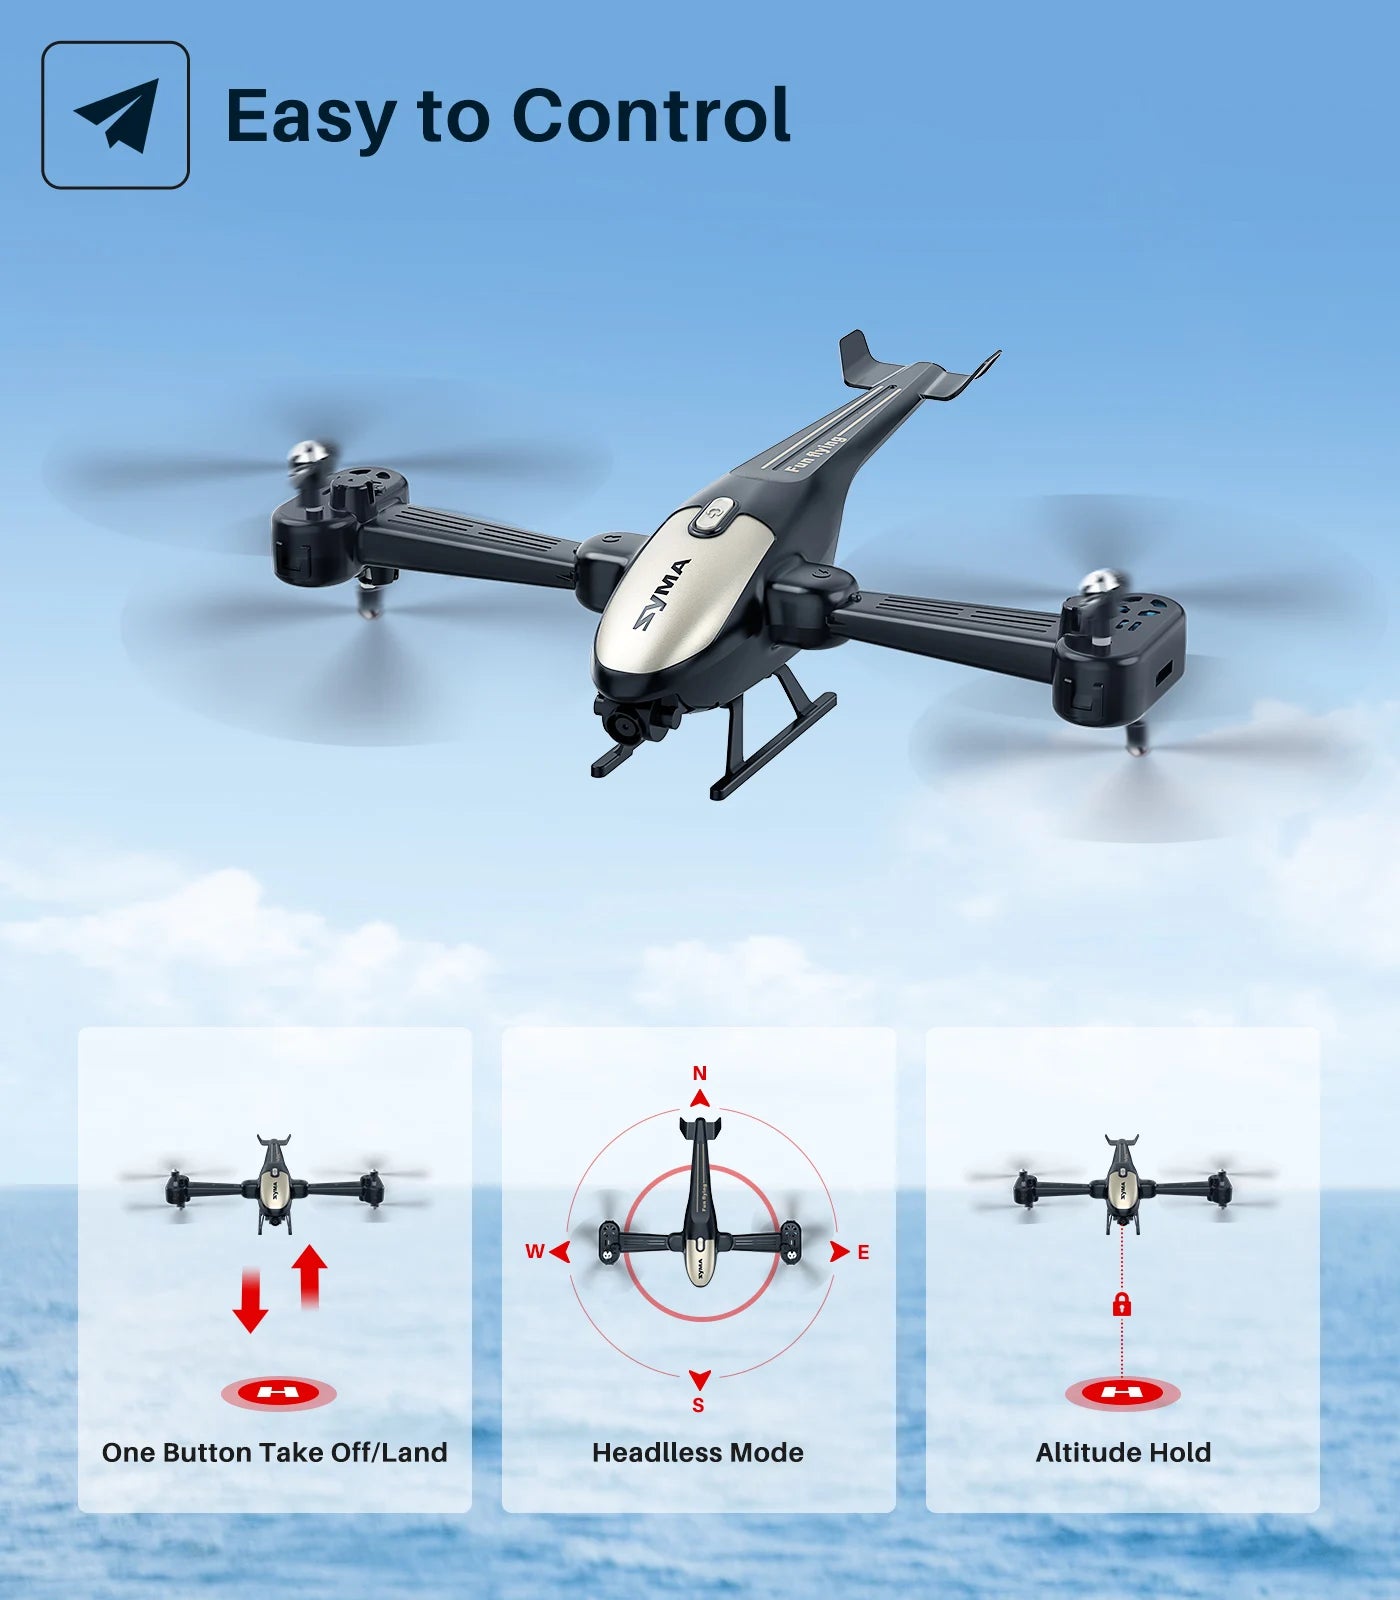 SYMA X700W RC Drone, Easy to Control W ( One Button Take Off/Land Headlless Mode